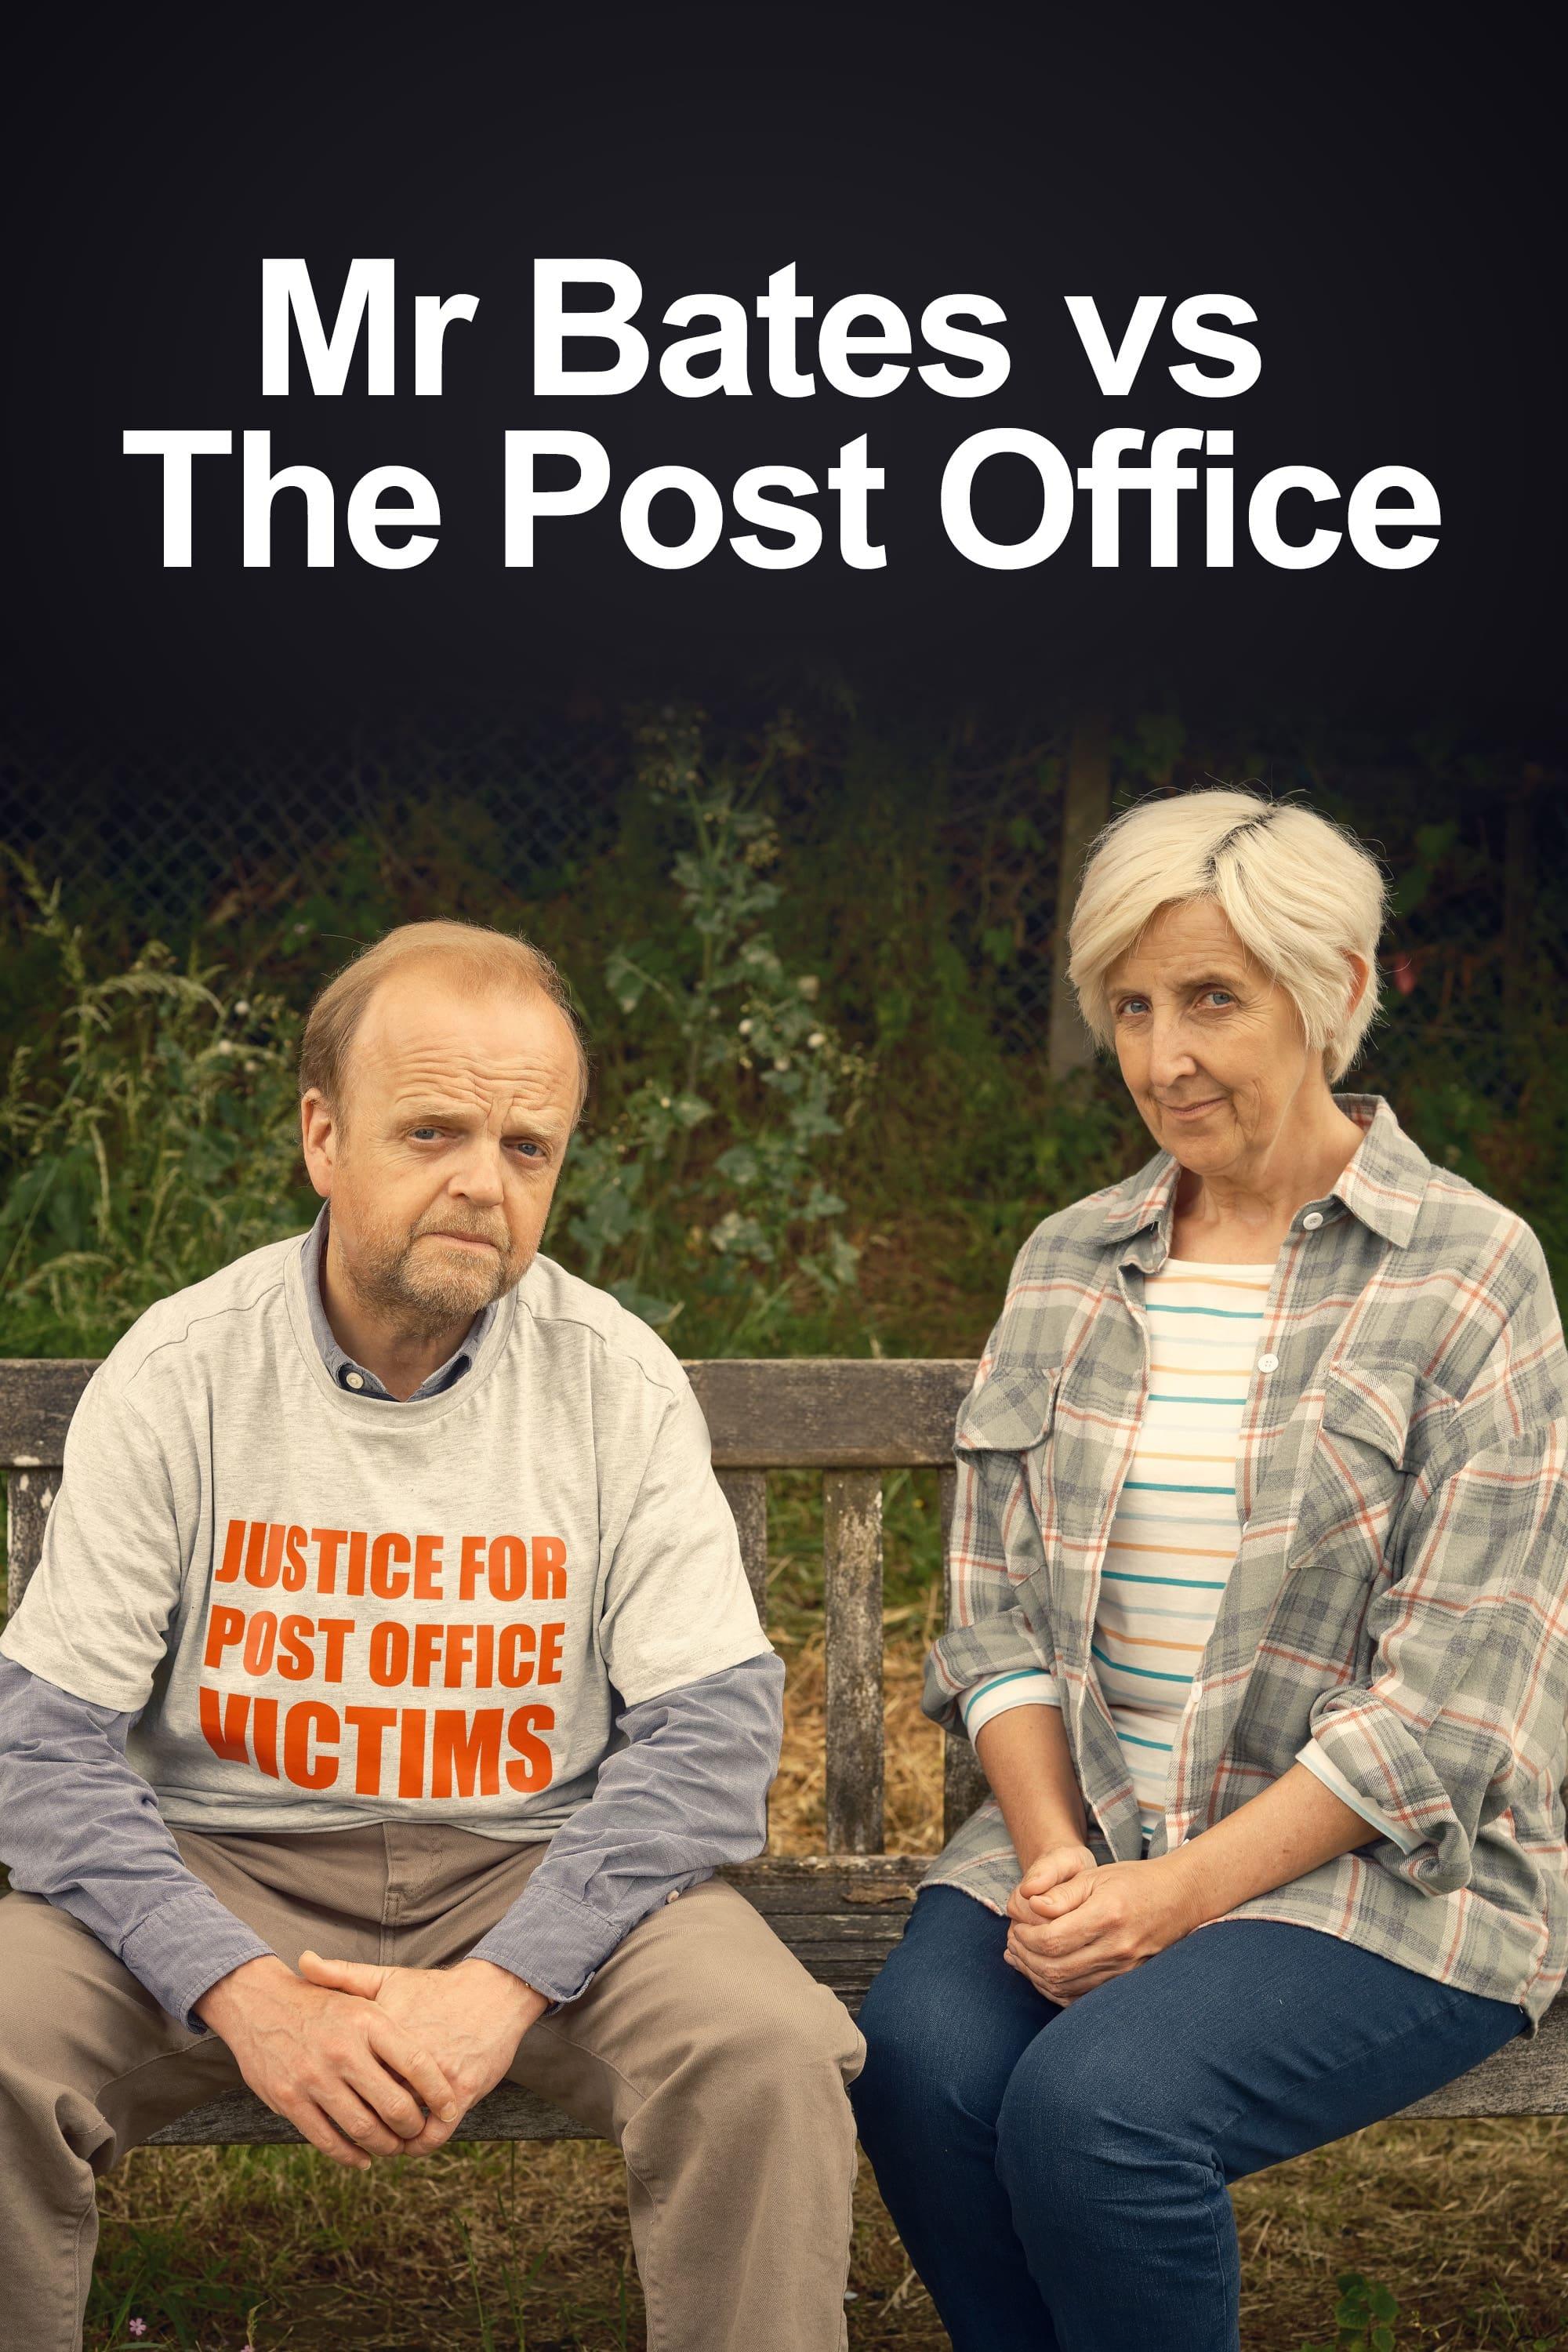 Mr Bates vs The Post Office poster